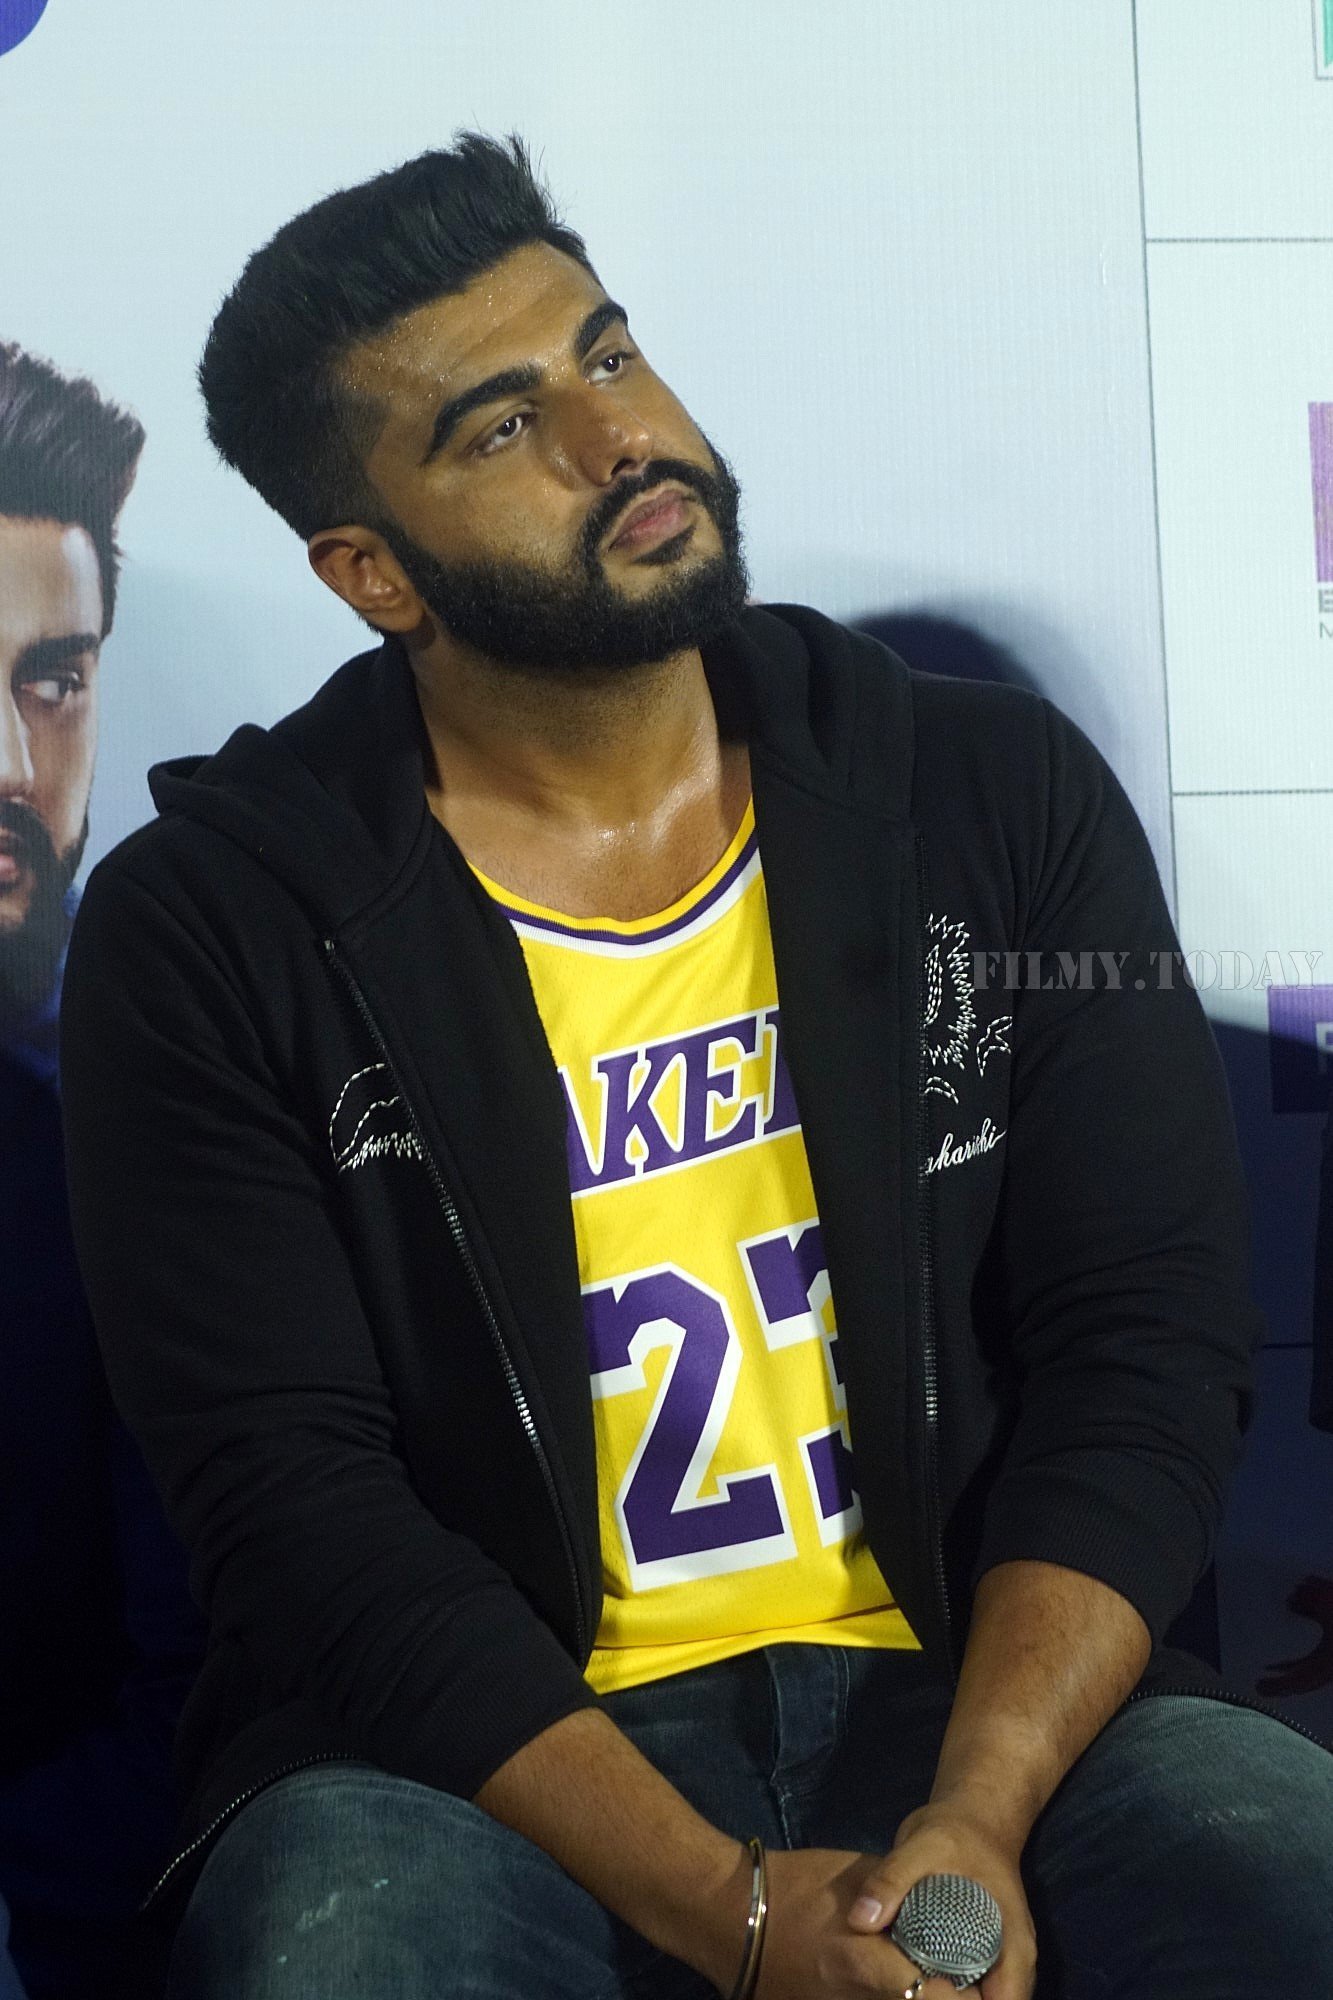 Arjun Kapoor - Photos: Song Launch Of 'Proper Patola' From Film 'Namaste England' | Picture 1602462